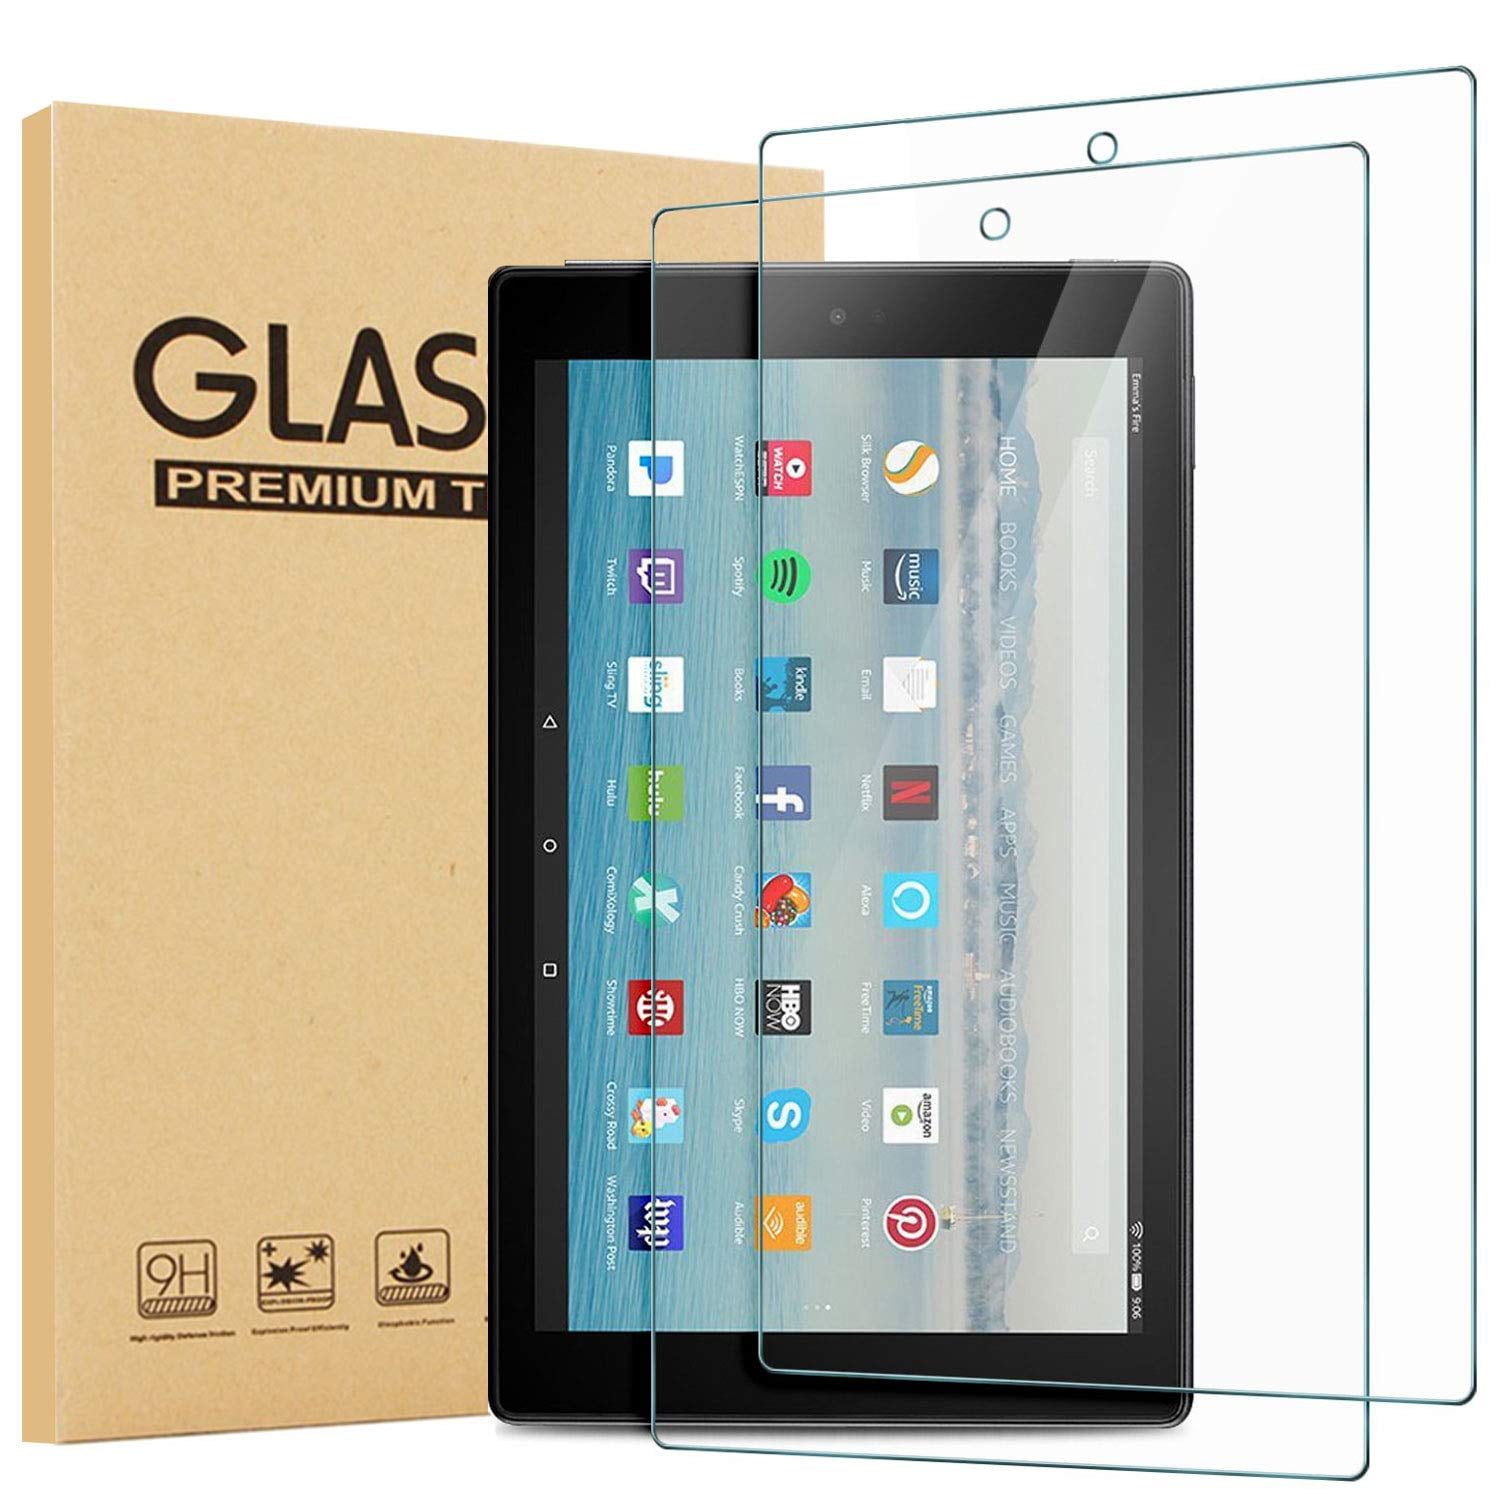 2 Pack Tempered Screen Protector For Amazon Kindle fire 7"/ HD 8"/ HD 10" Tablet 